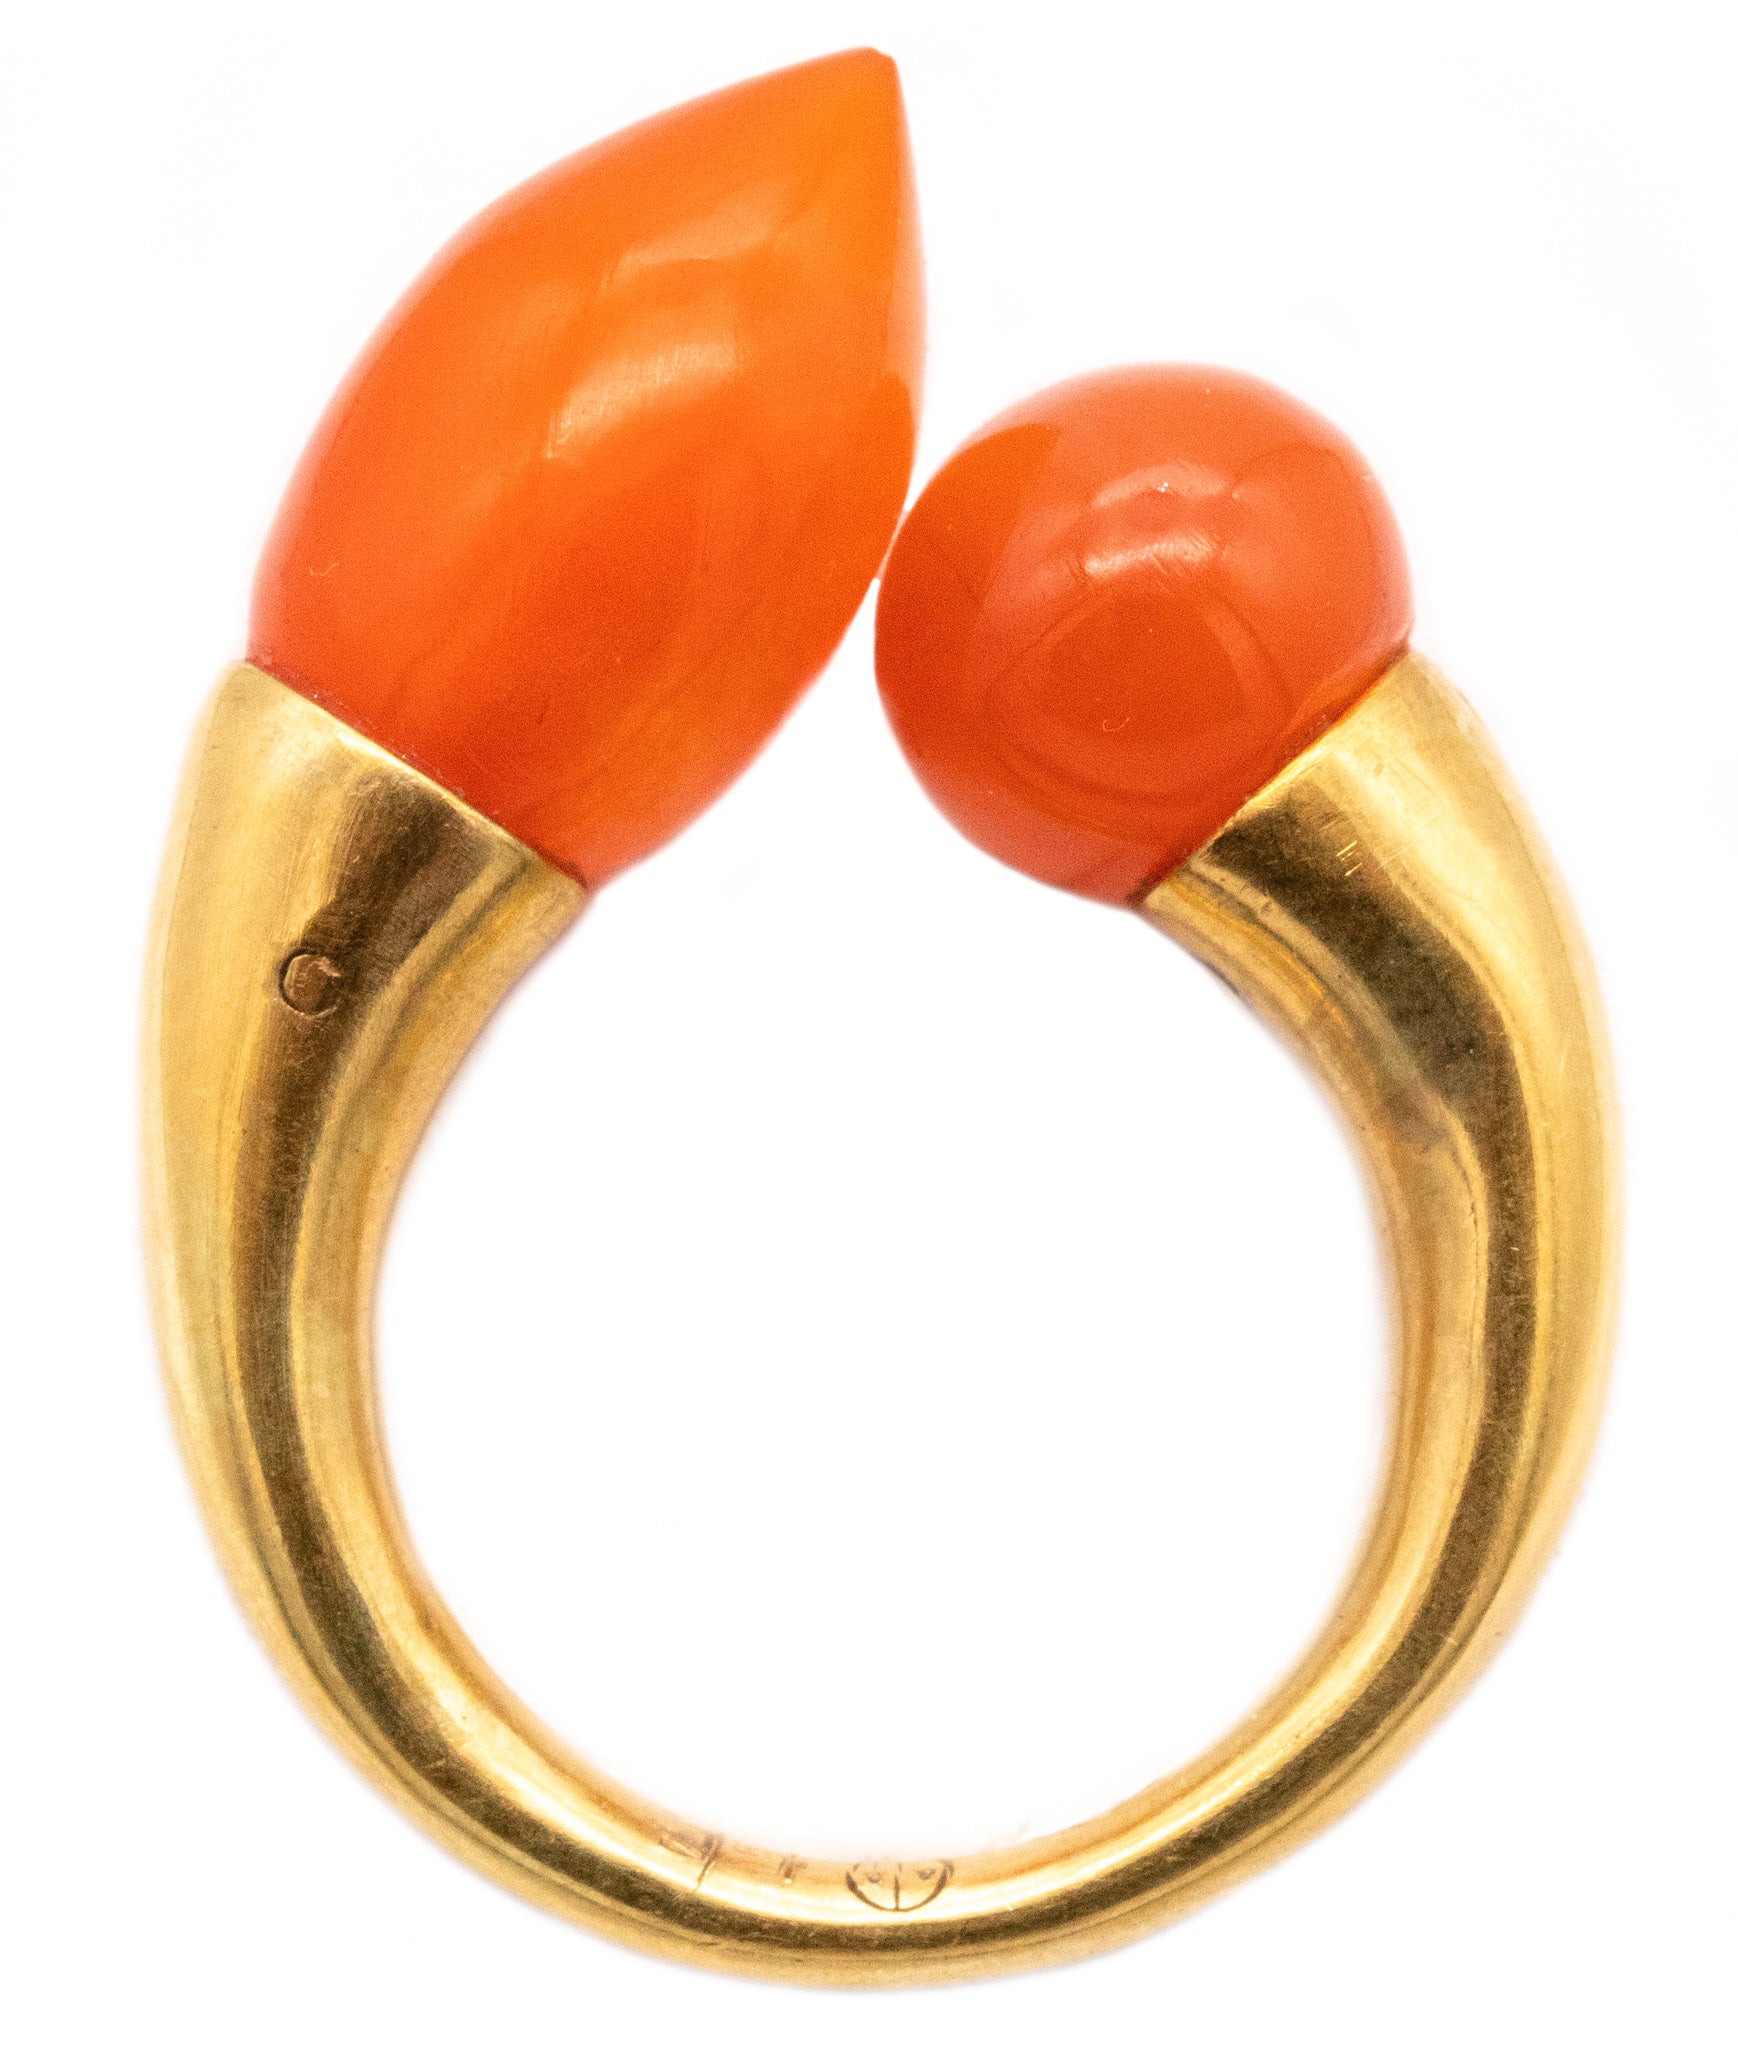 Liu Fang Hong Kong Toi Et Moi Ring In 18Kt Gold With Ancient Roman Red Agate Carvings